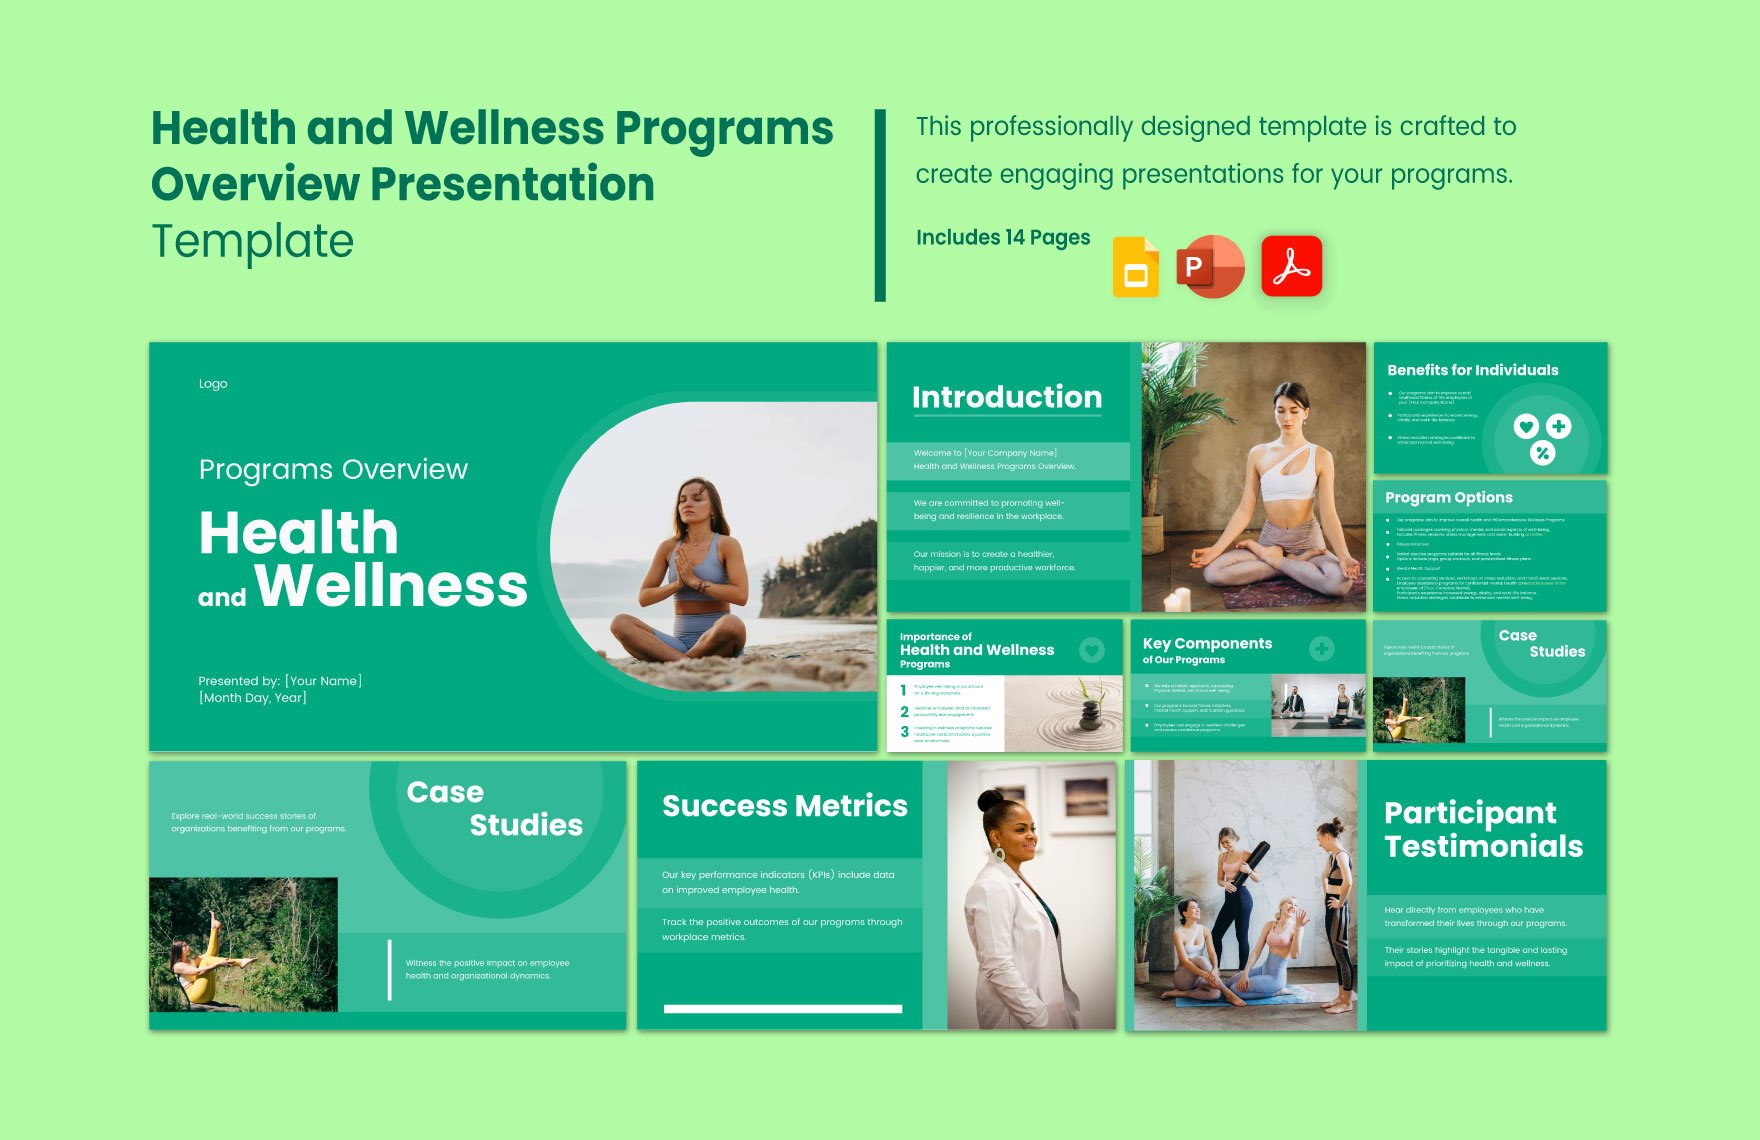 Health and Wellness Programs Overview Presentation Template